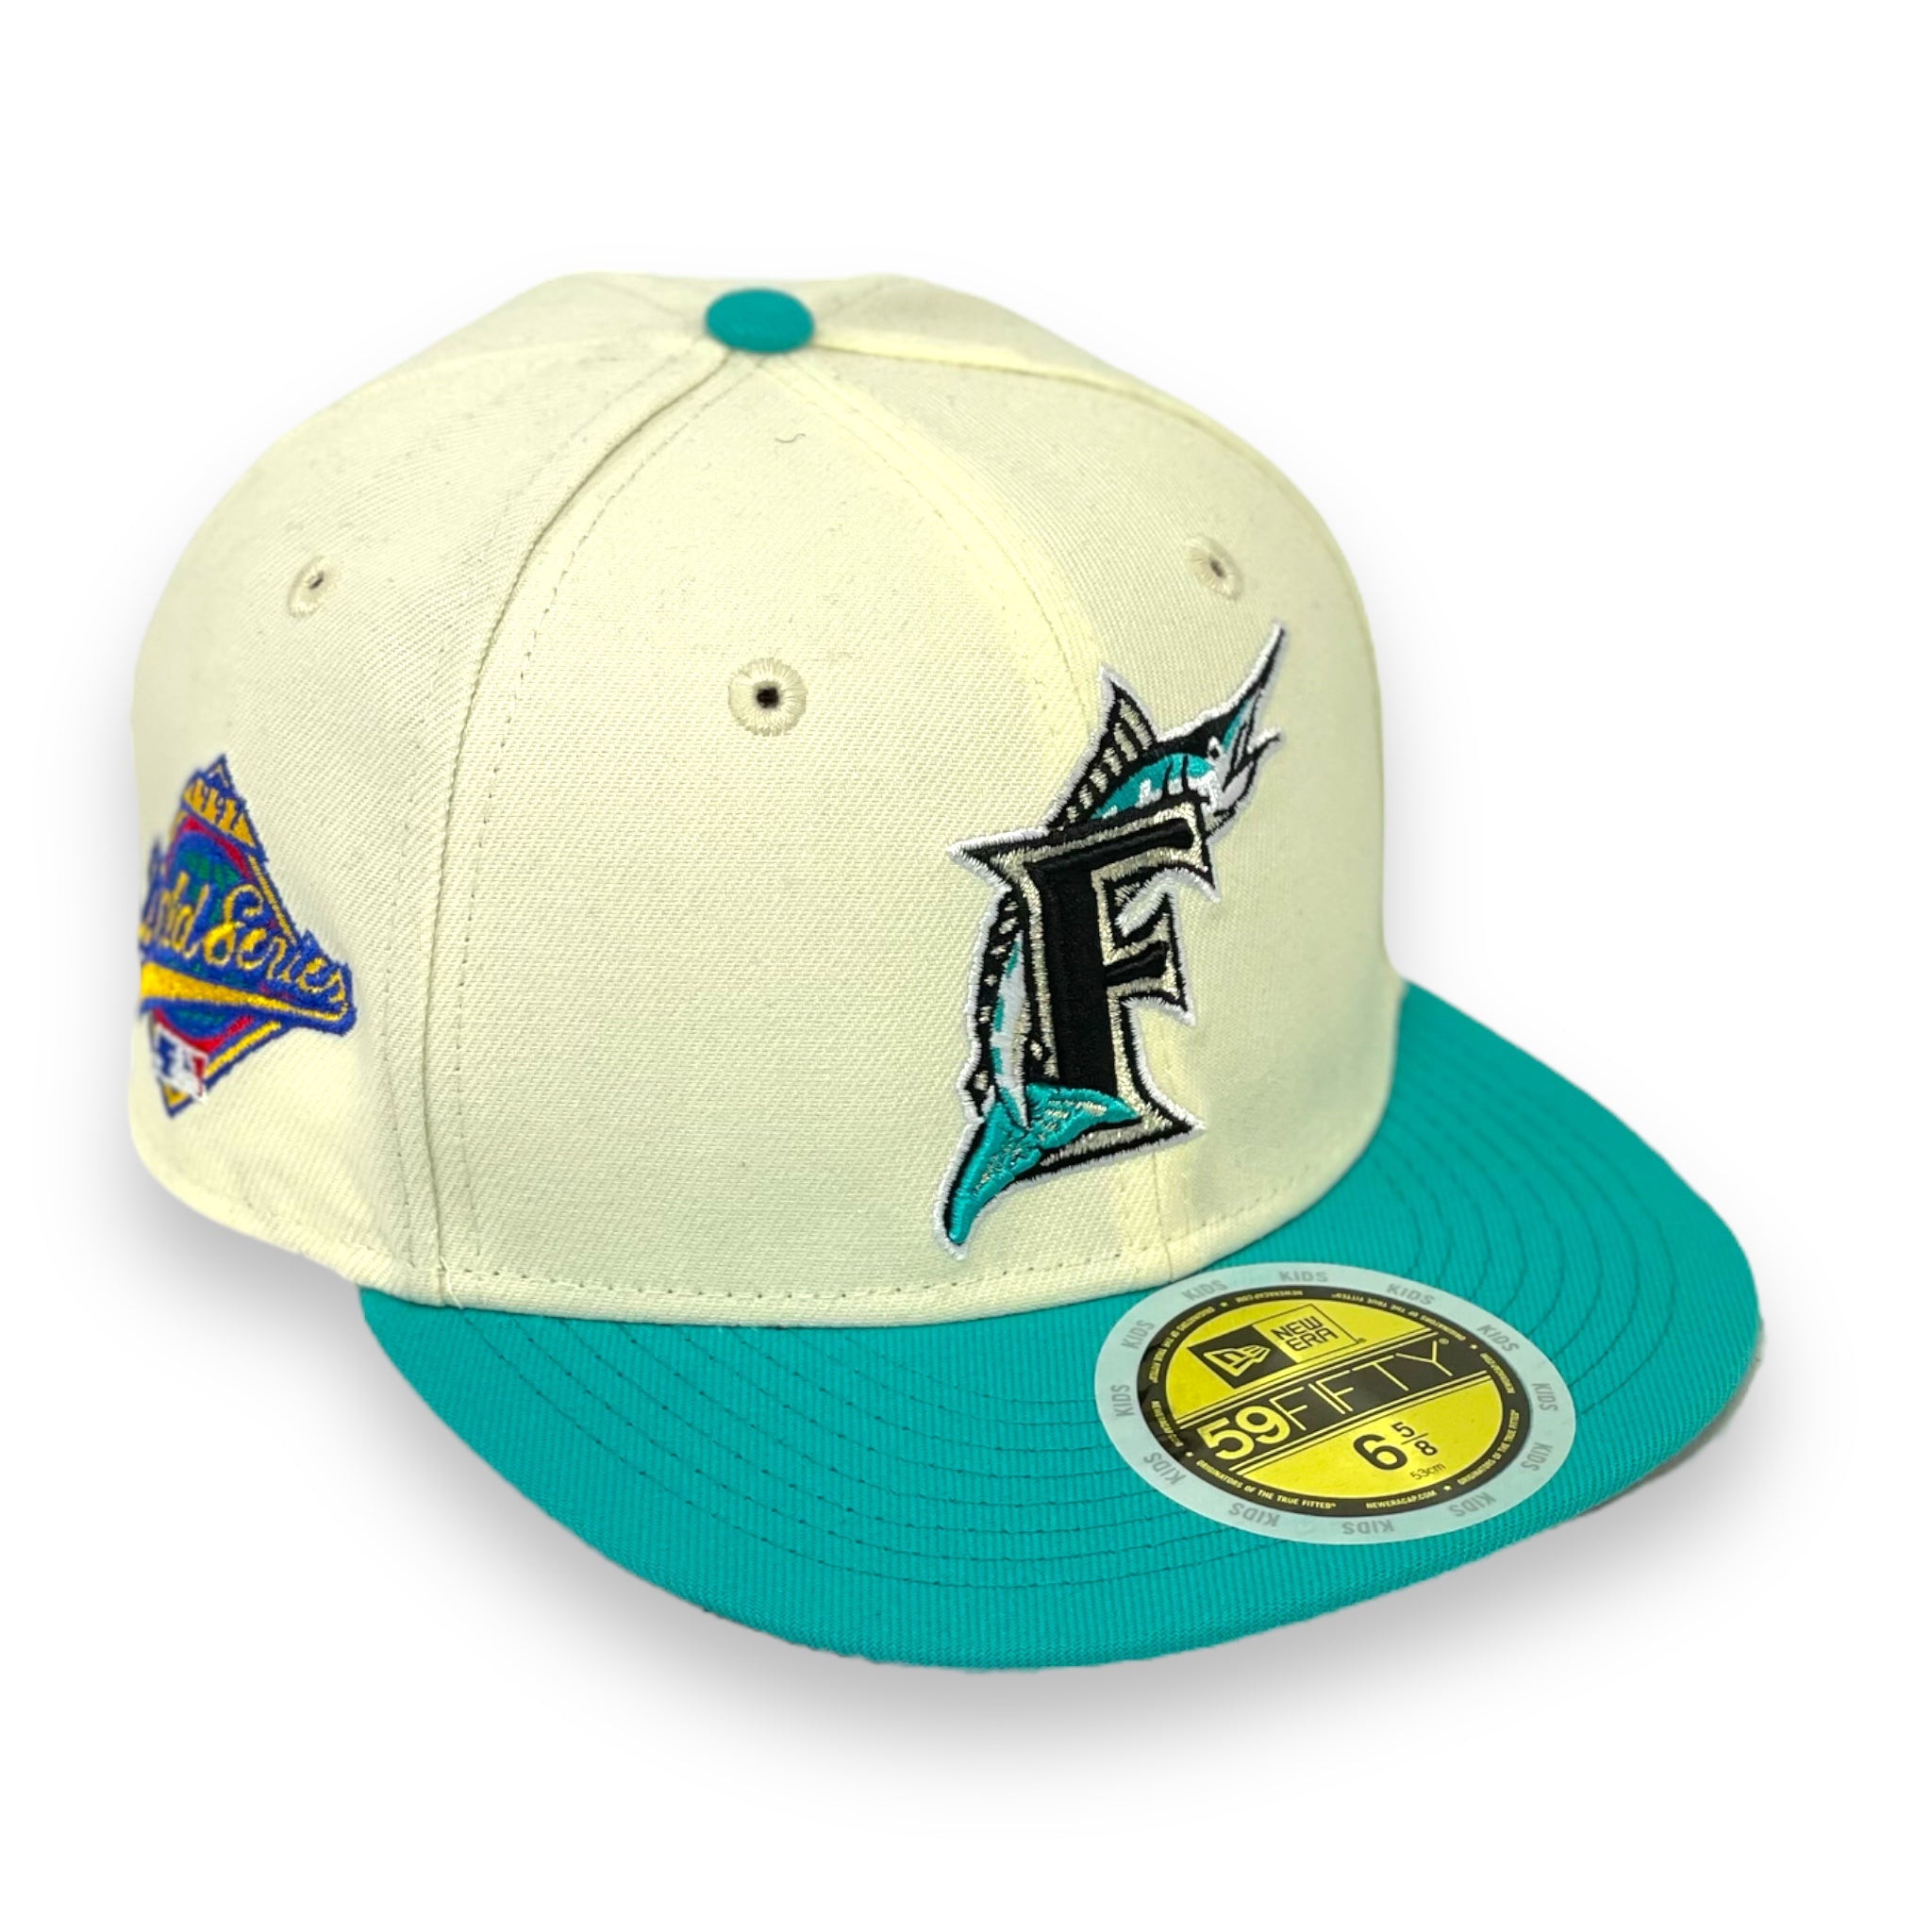 "KIDS" MARLINS (OFF-WHITE) (1997 WORLDSERIES) NEW ERA 59FIFTY FITTED (RED UNDER VISOR)